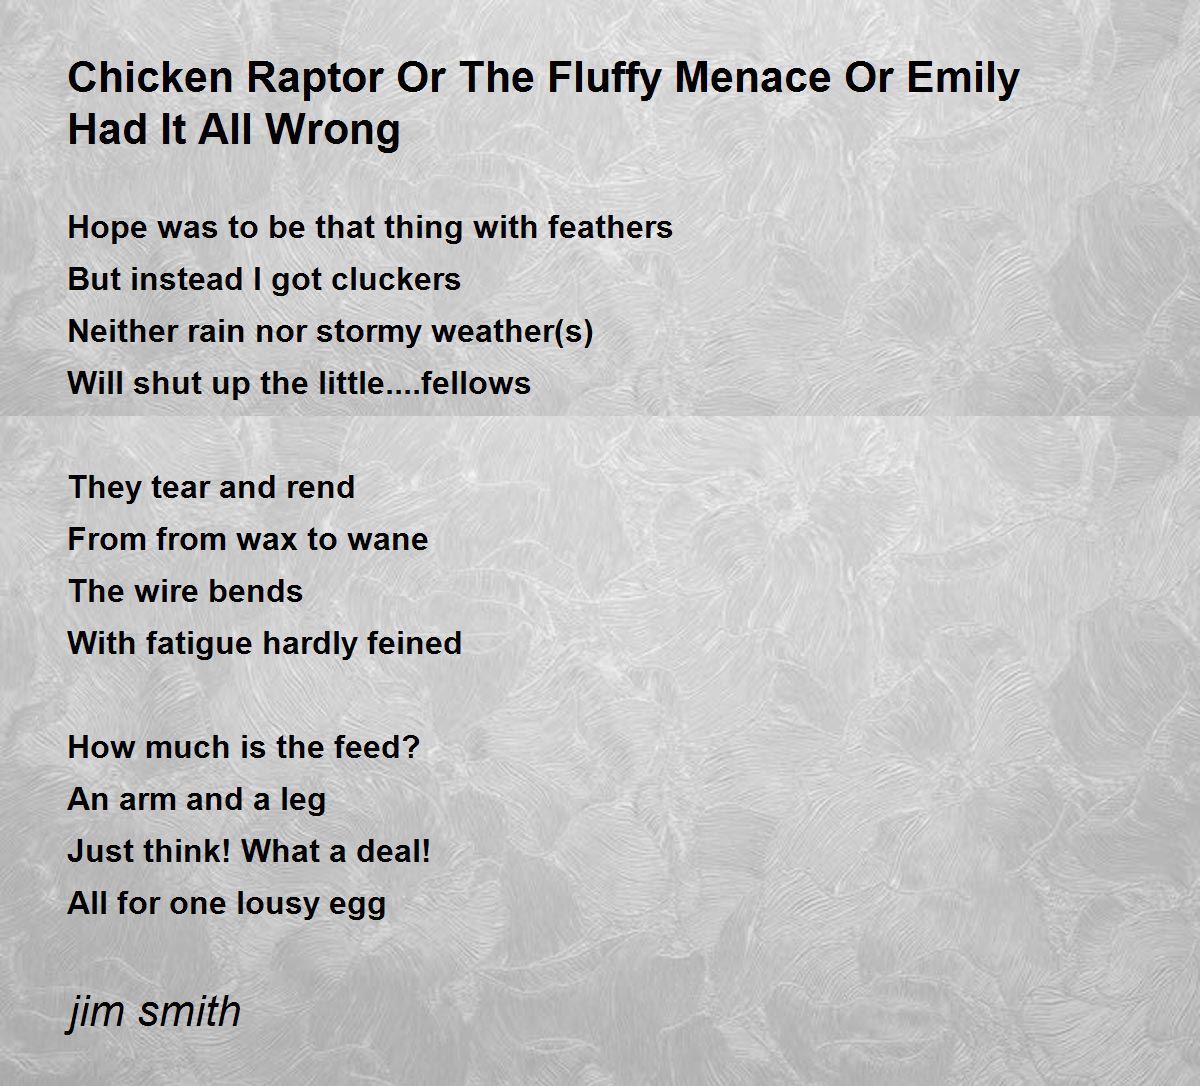 Chicken Raptor Or The Fluffy Menace Or Emily Had It All Wrong - Chicken  Raptor Or The Fluffy Menace Or Emily Had It All Wrong Poem by jim smith